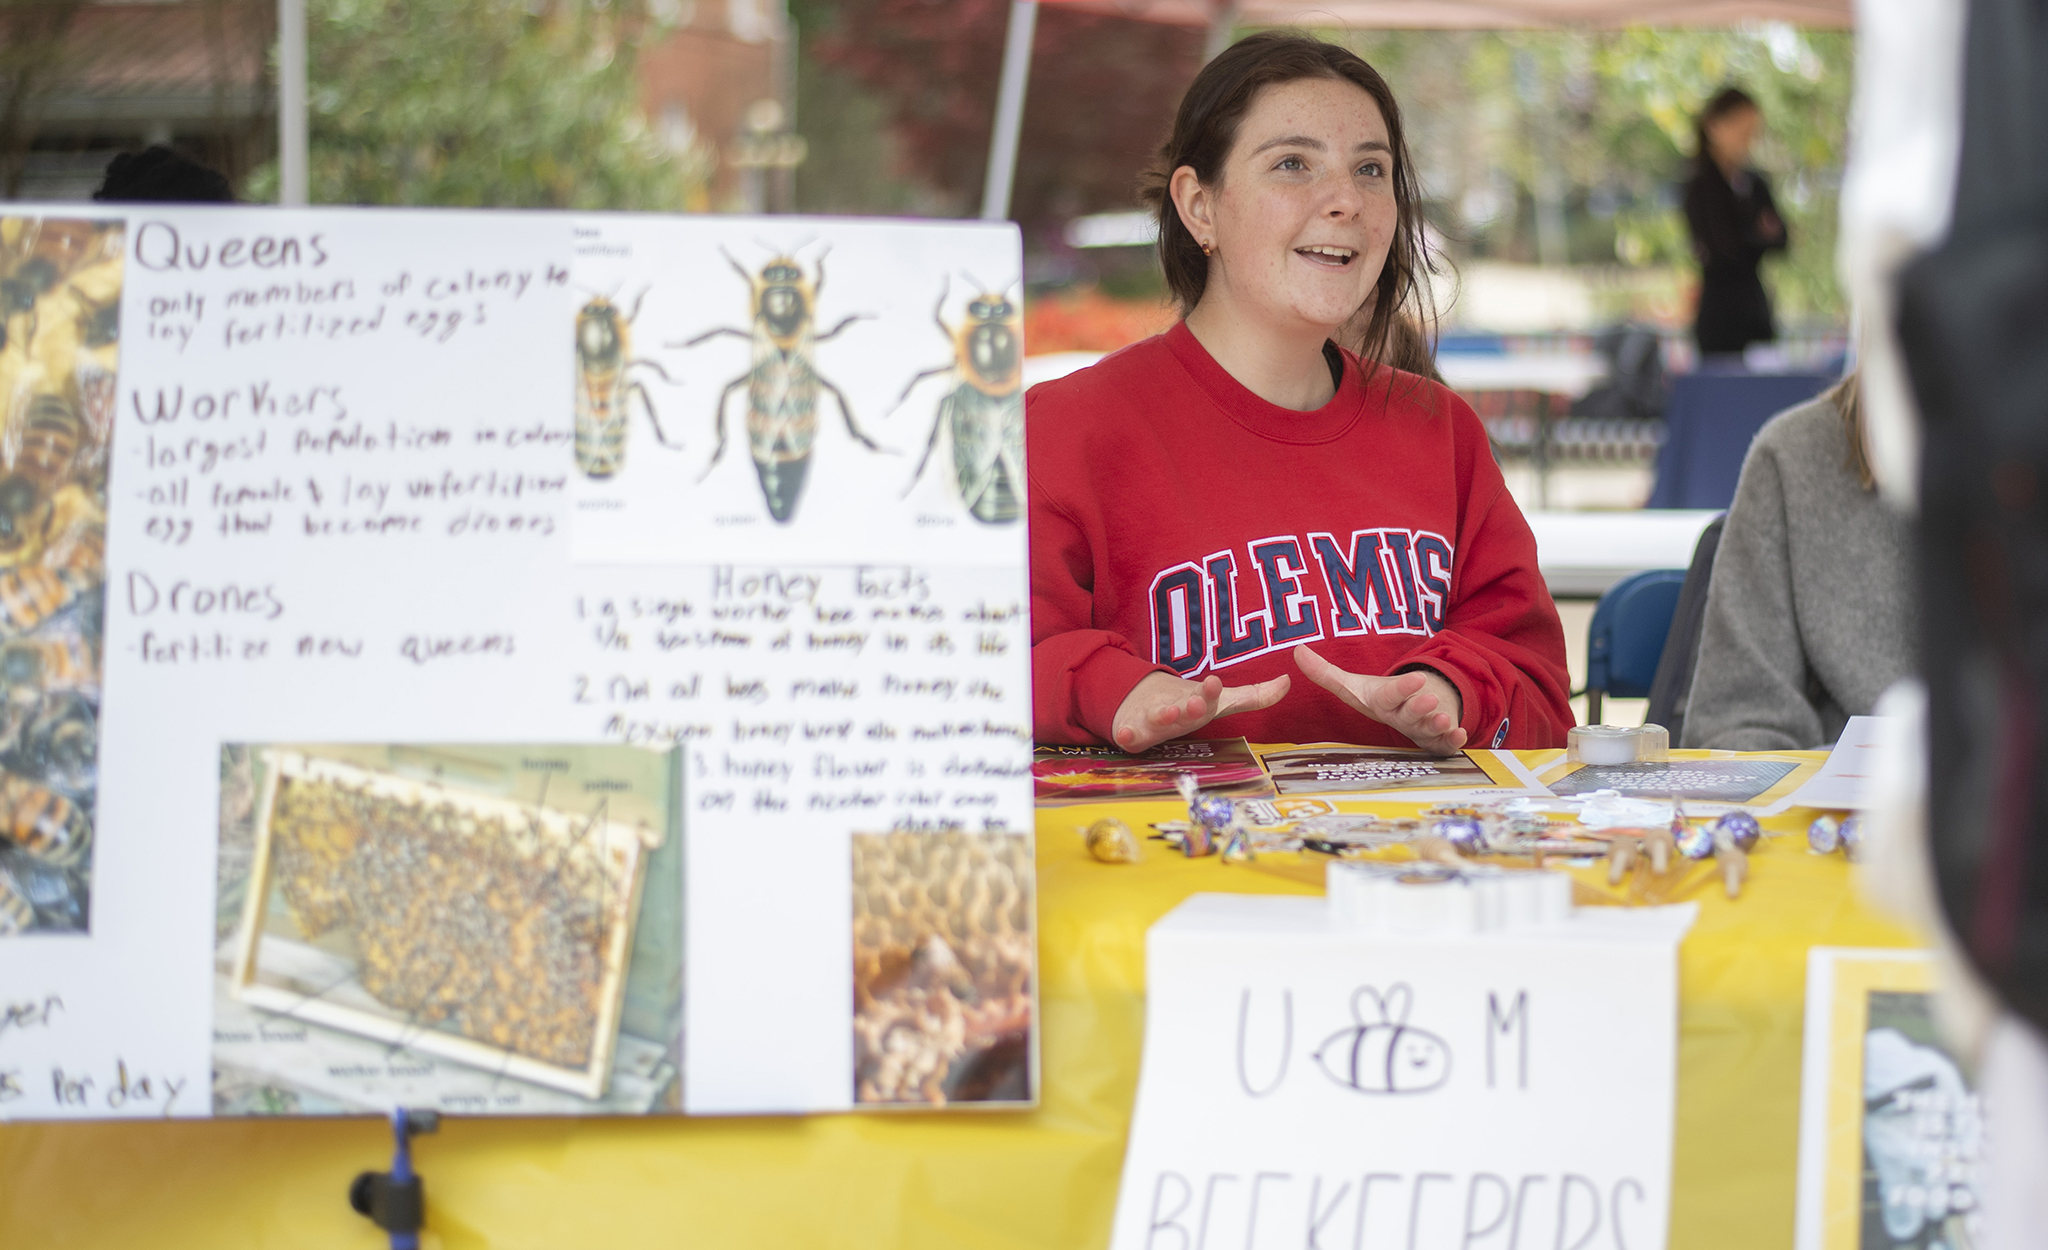 Green Week, which has been held at Ole Miss since 2009, is being expanded to the entire month of April. The Earth Month celebration will feature more events and environmental education opportunities. Photo by Logan Kirkland/Ole Miss Digital Imaging Services